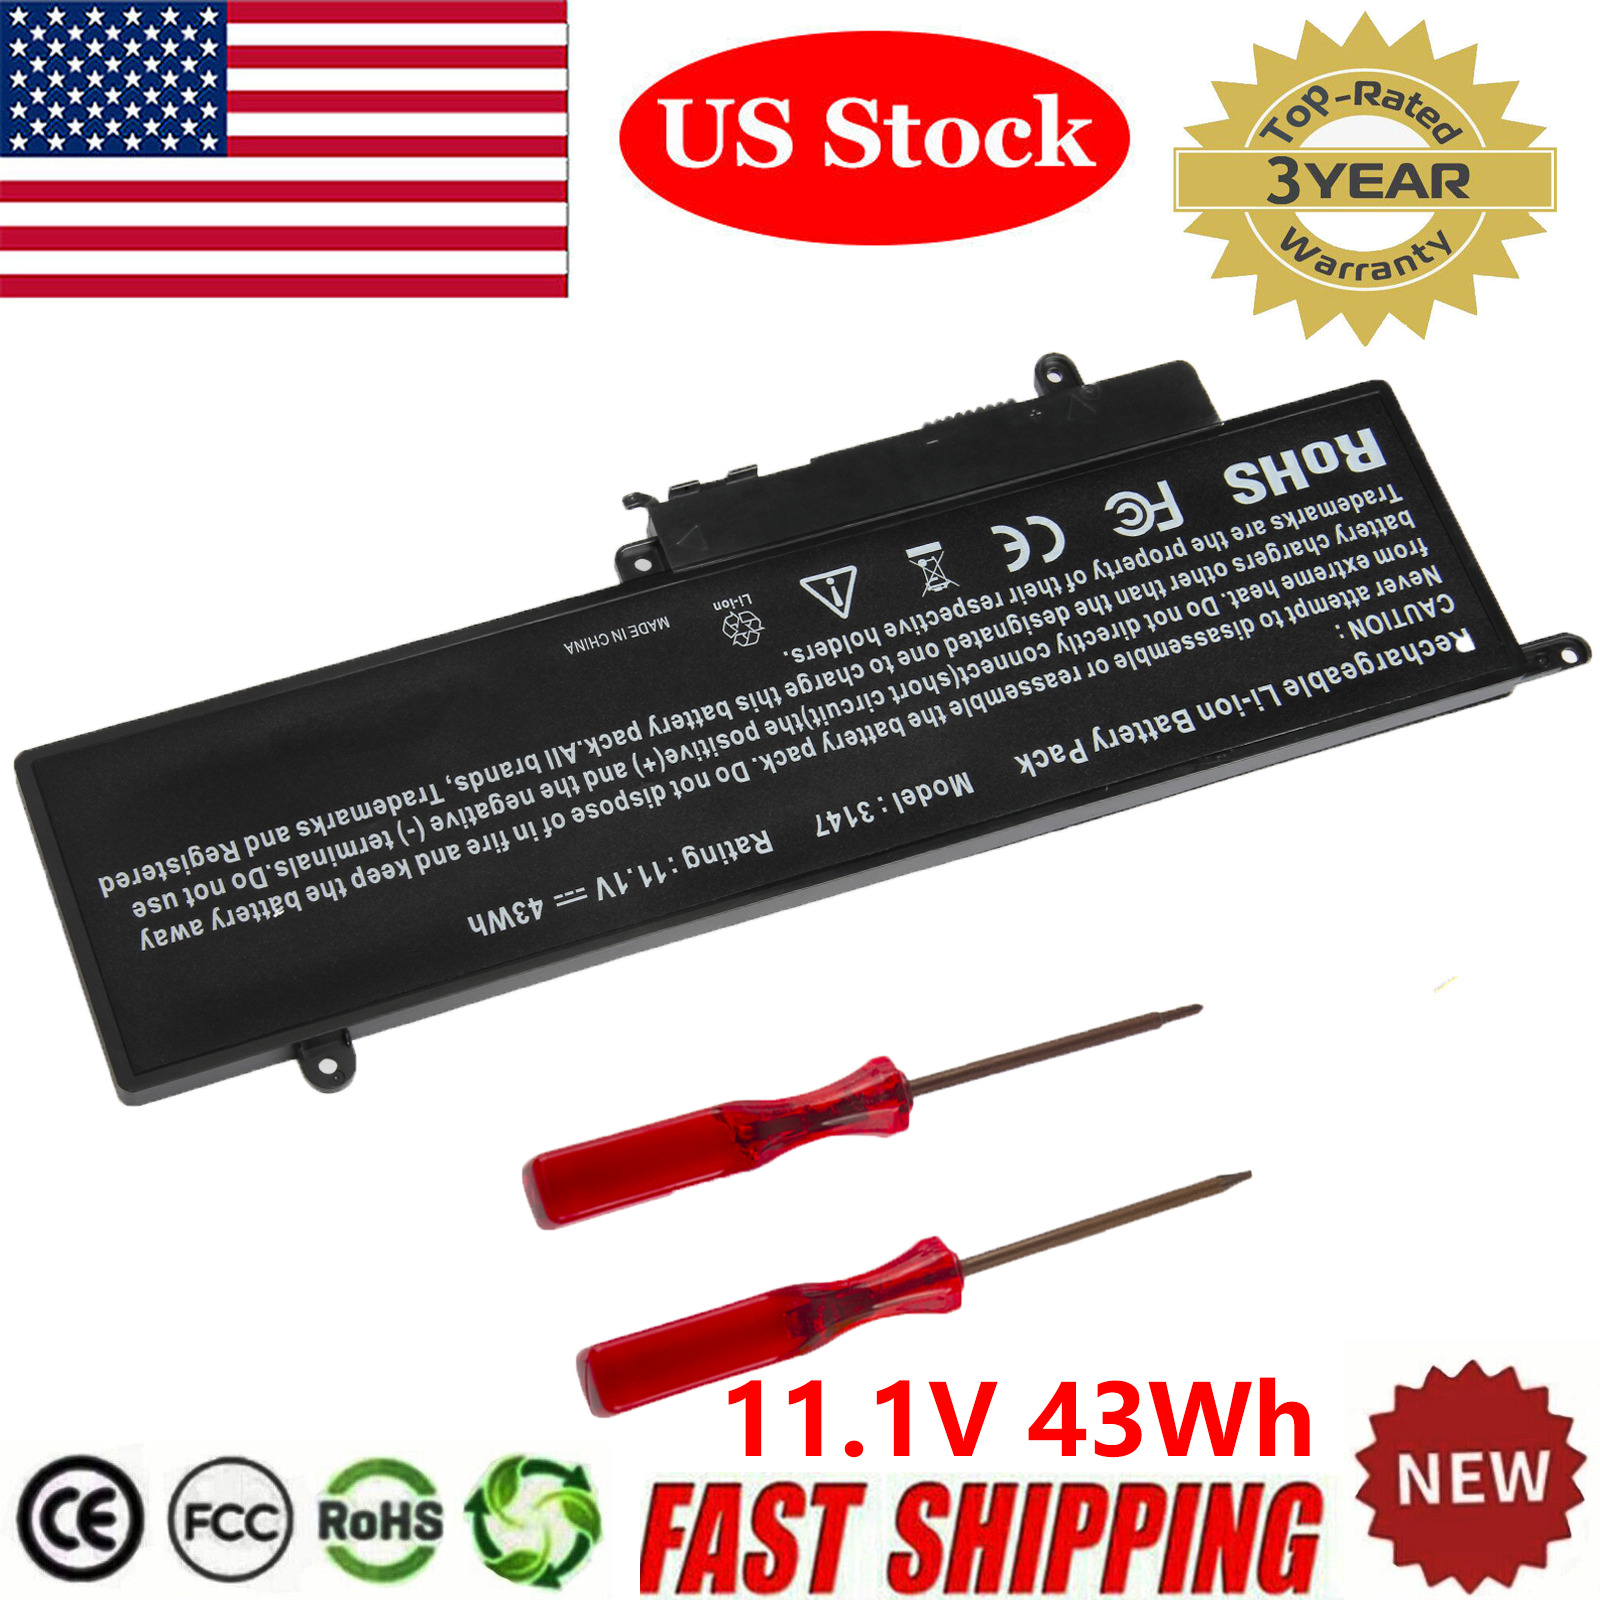 GK5KY Battery For Dell Inspiron 11 3000 3147 3148 3152 Series Inspiron 7000 43Wh